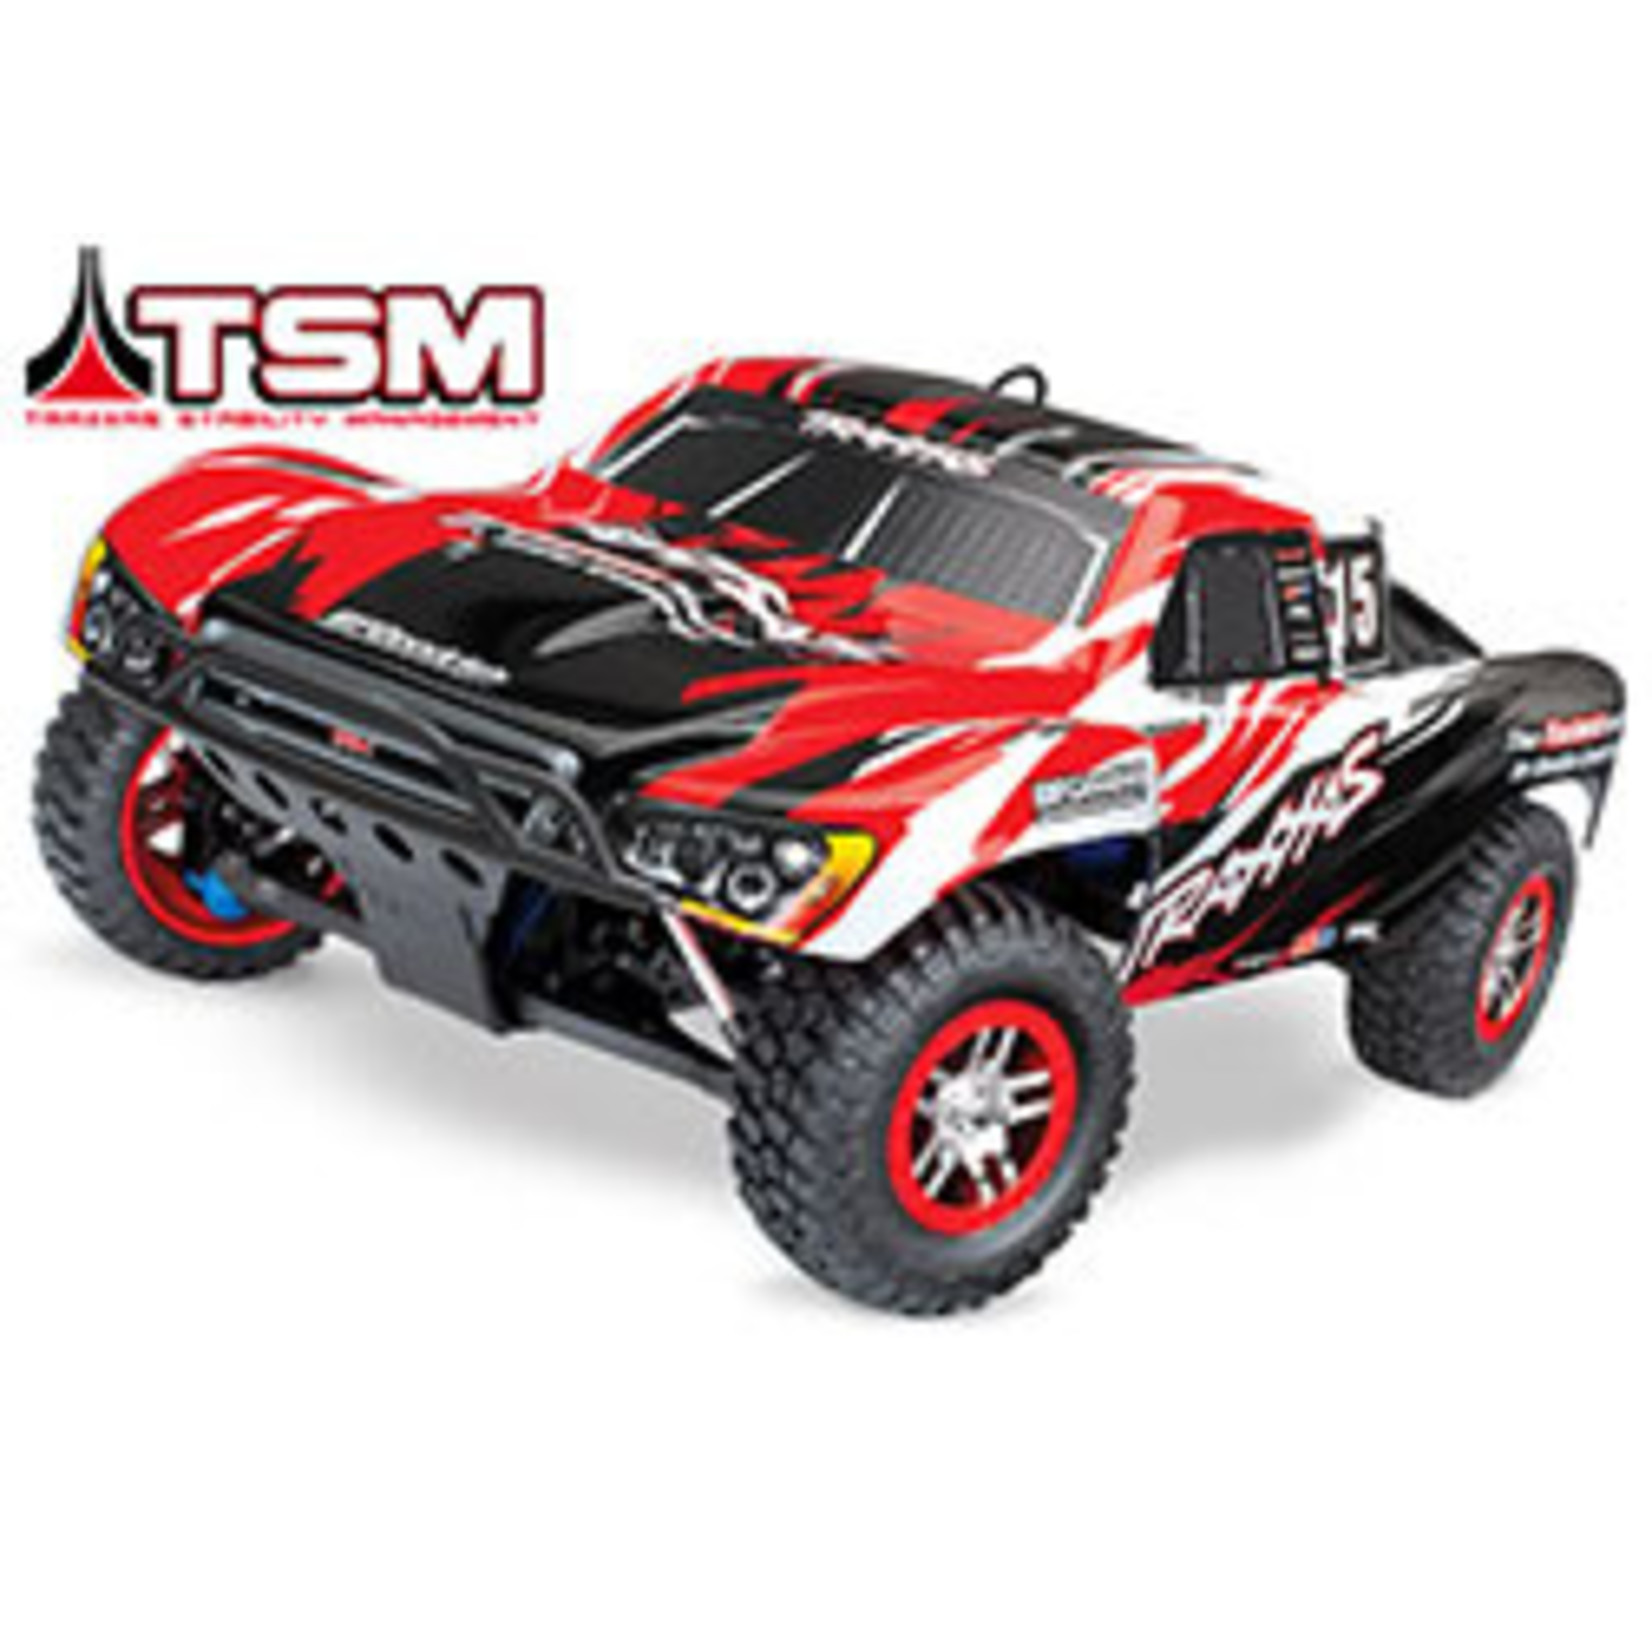 Traxxas 5998 Sway bar kit, Slayer (front and rear) (includes front and rear sway bars and adjustable linkage)